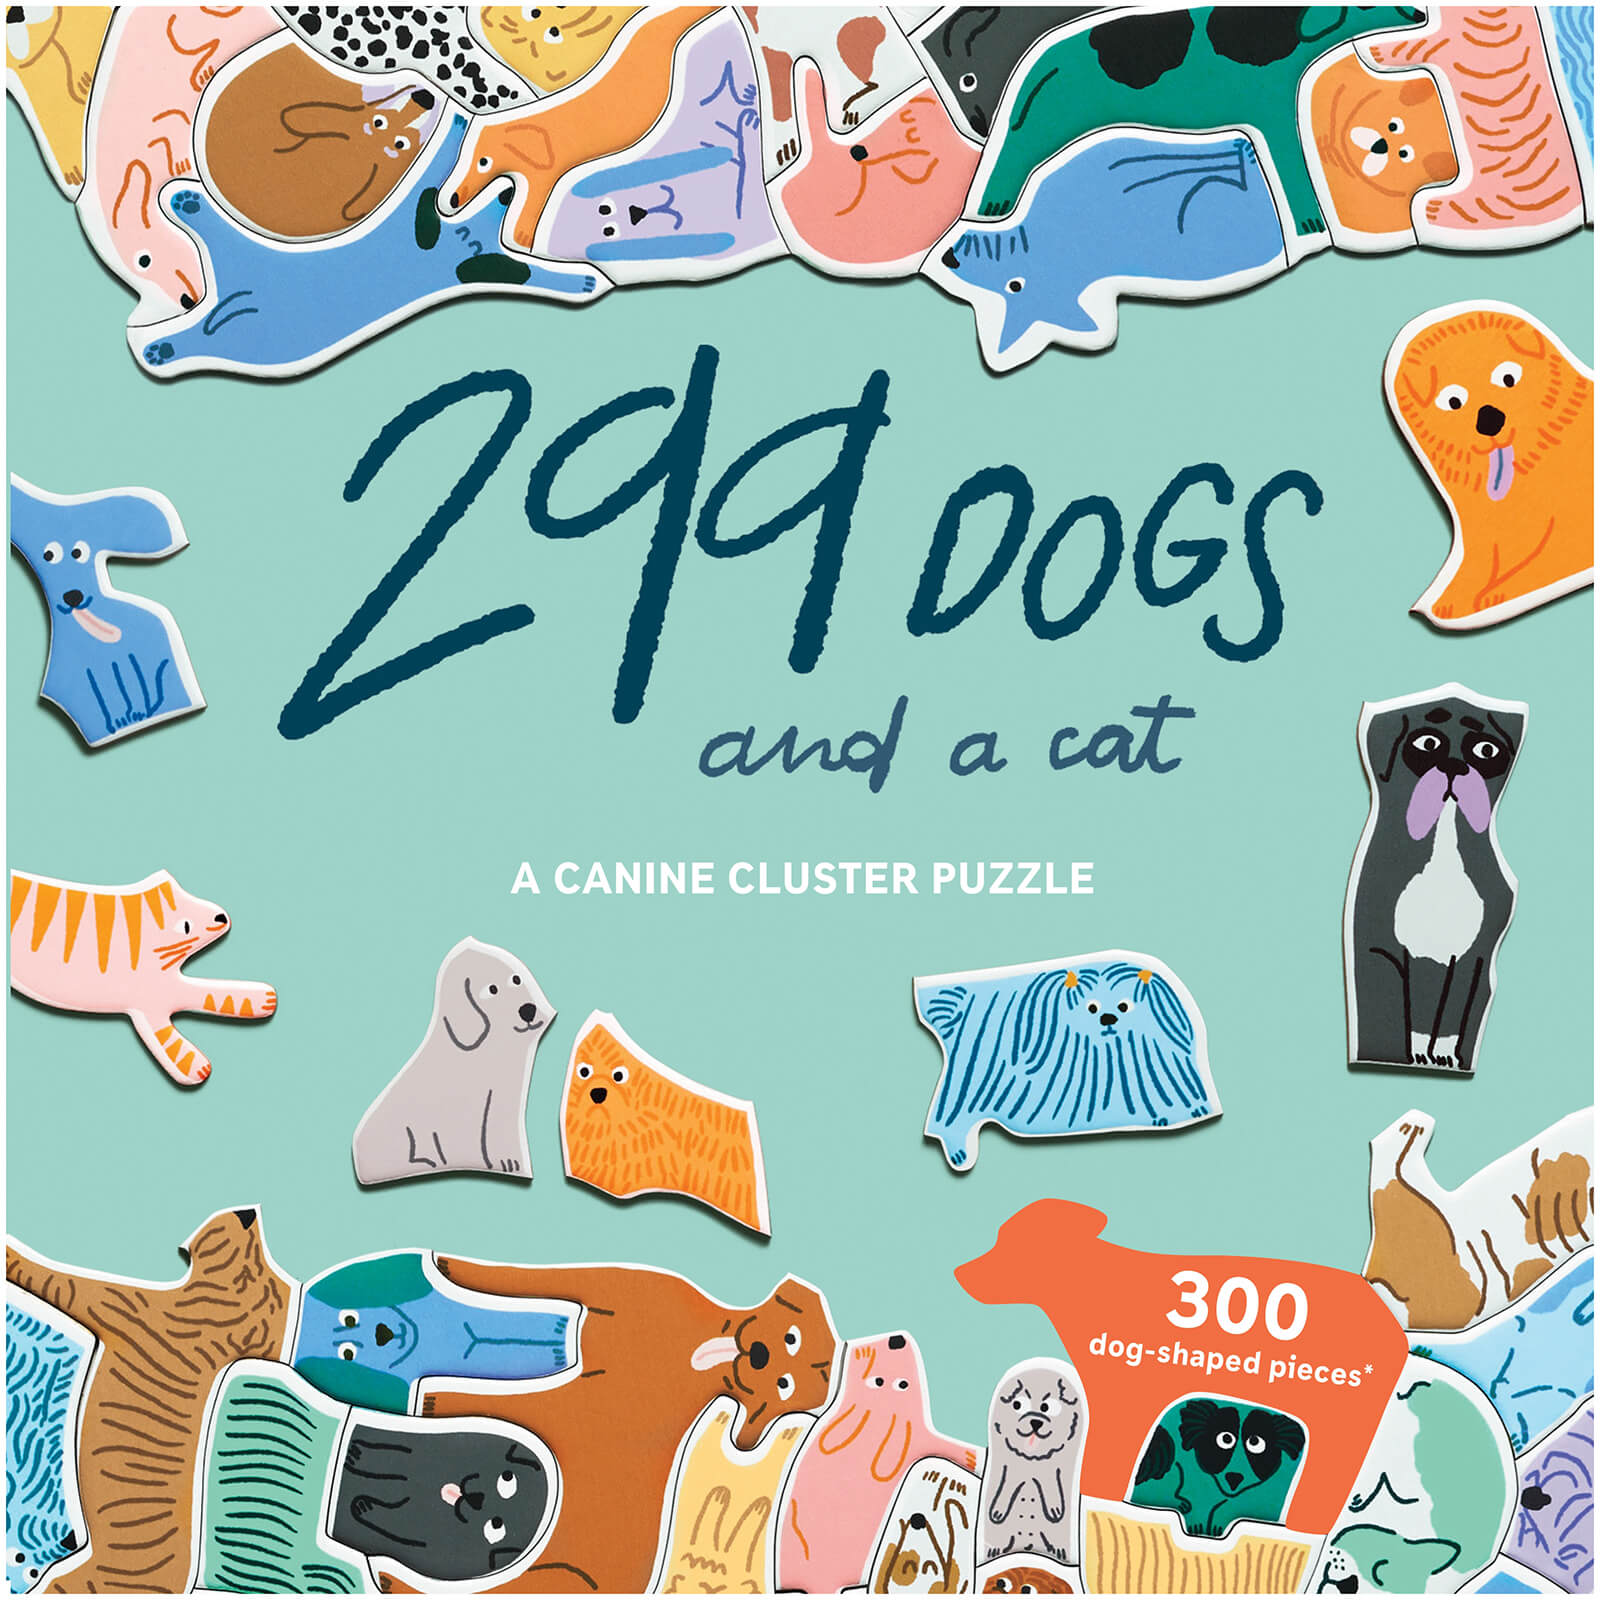 299 Dogs and a Cat Cluster Puzzle